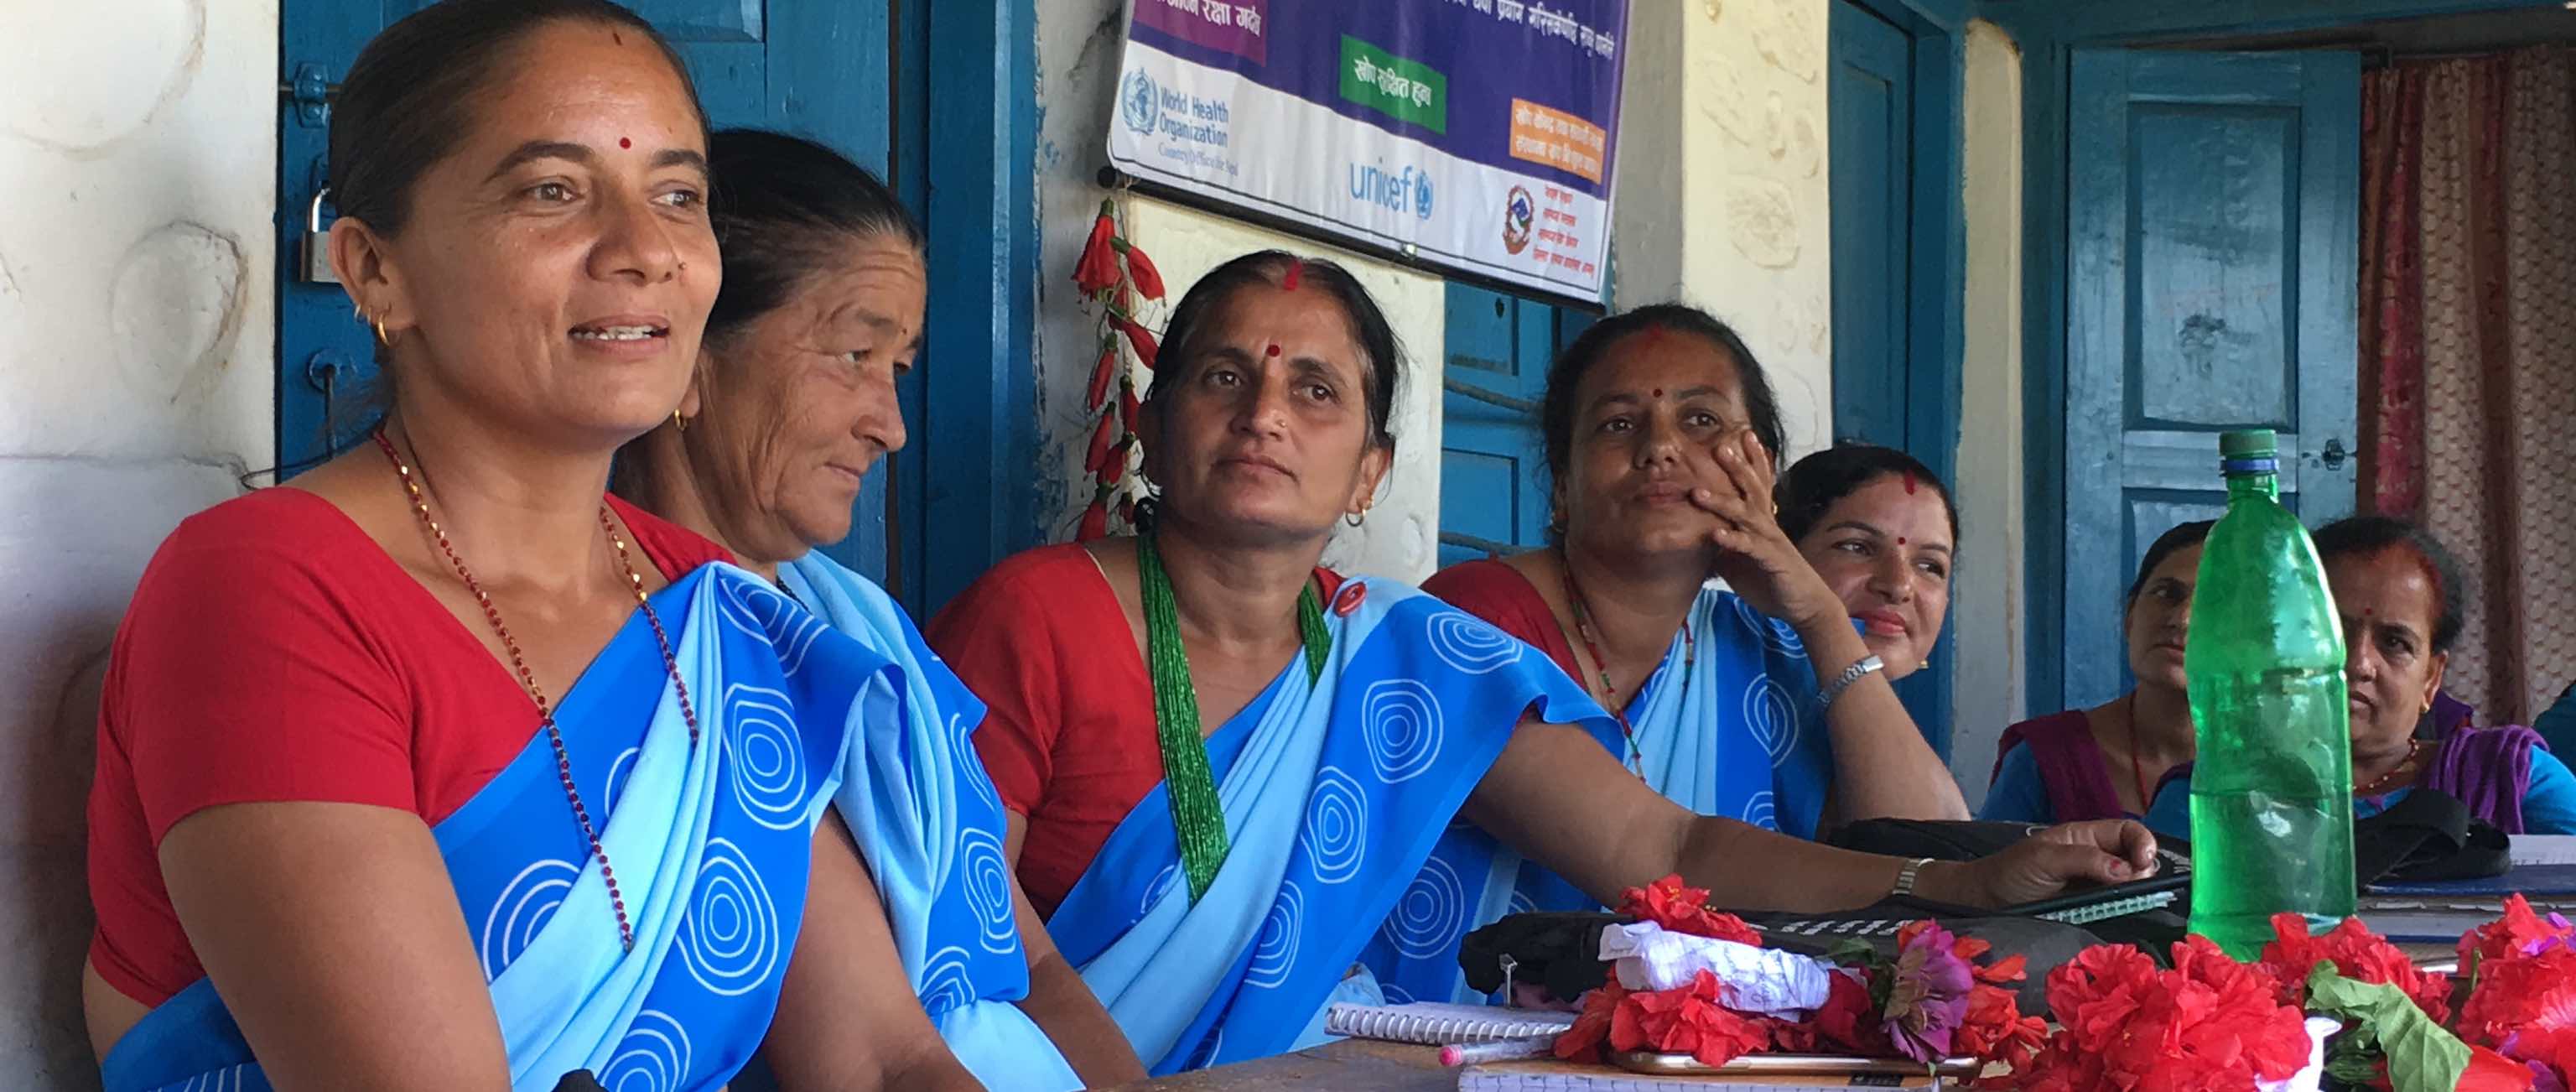 South Asia: Skoll Awardees Drive Change in Health and Gender Equality